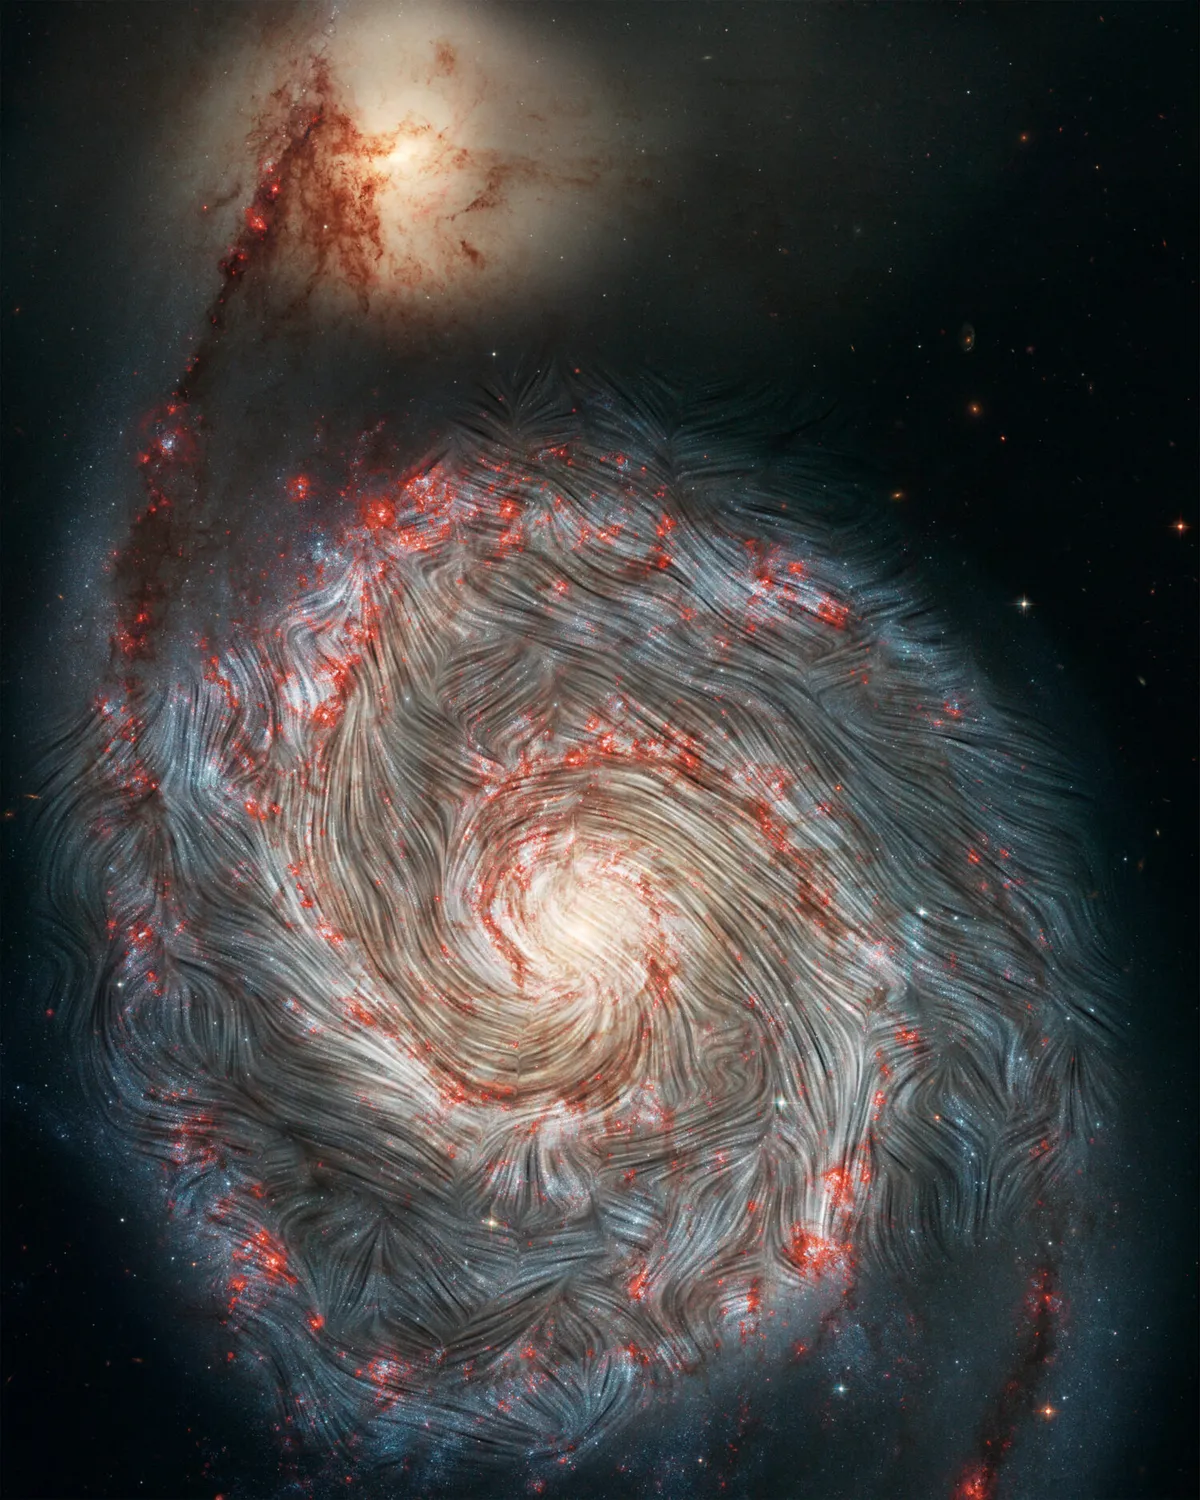 Magnetic field lines on the Whirlpool Galaxy, as seen by the Hubble Space Telescope and SOFIA Observatory. Credit: NASA/the SOFIA science team/A. Borlaff/NASA/ESA/S. Beckwith (STScI) and the Hubble Heritage Team (STScI/AURA)